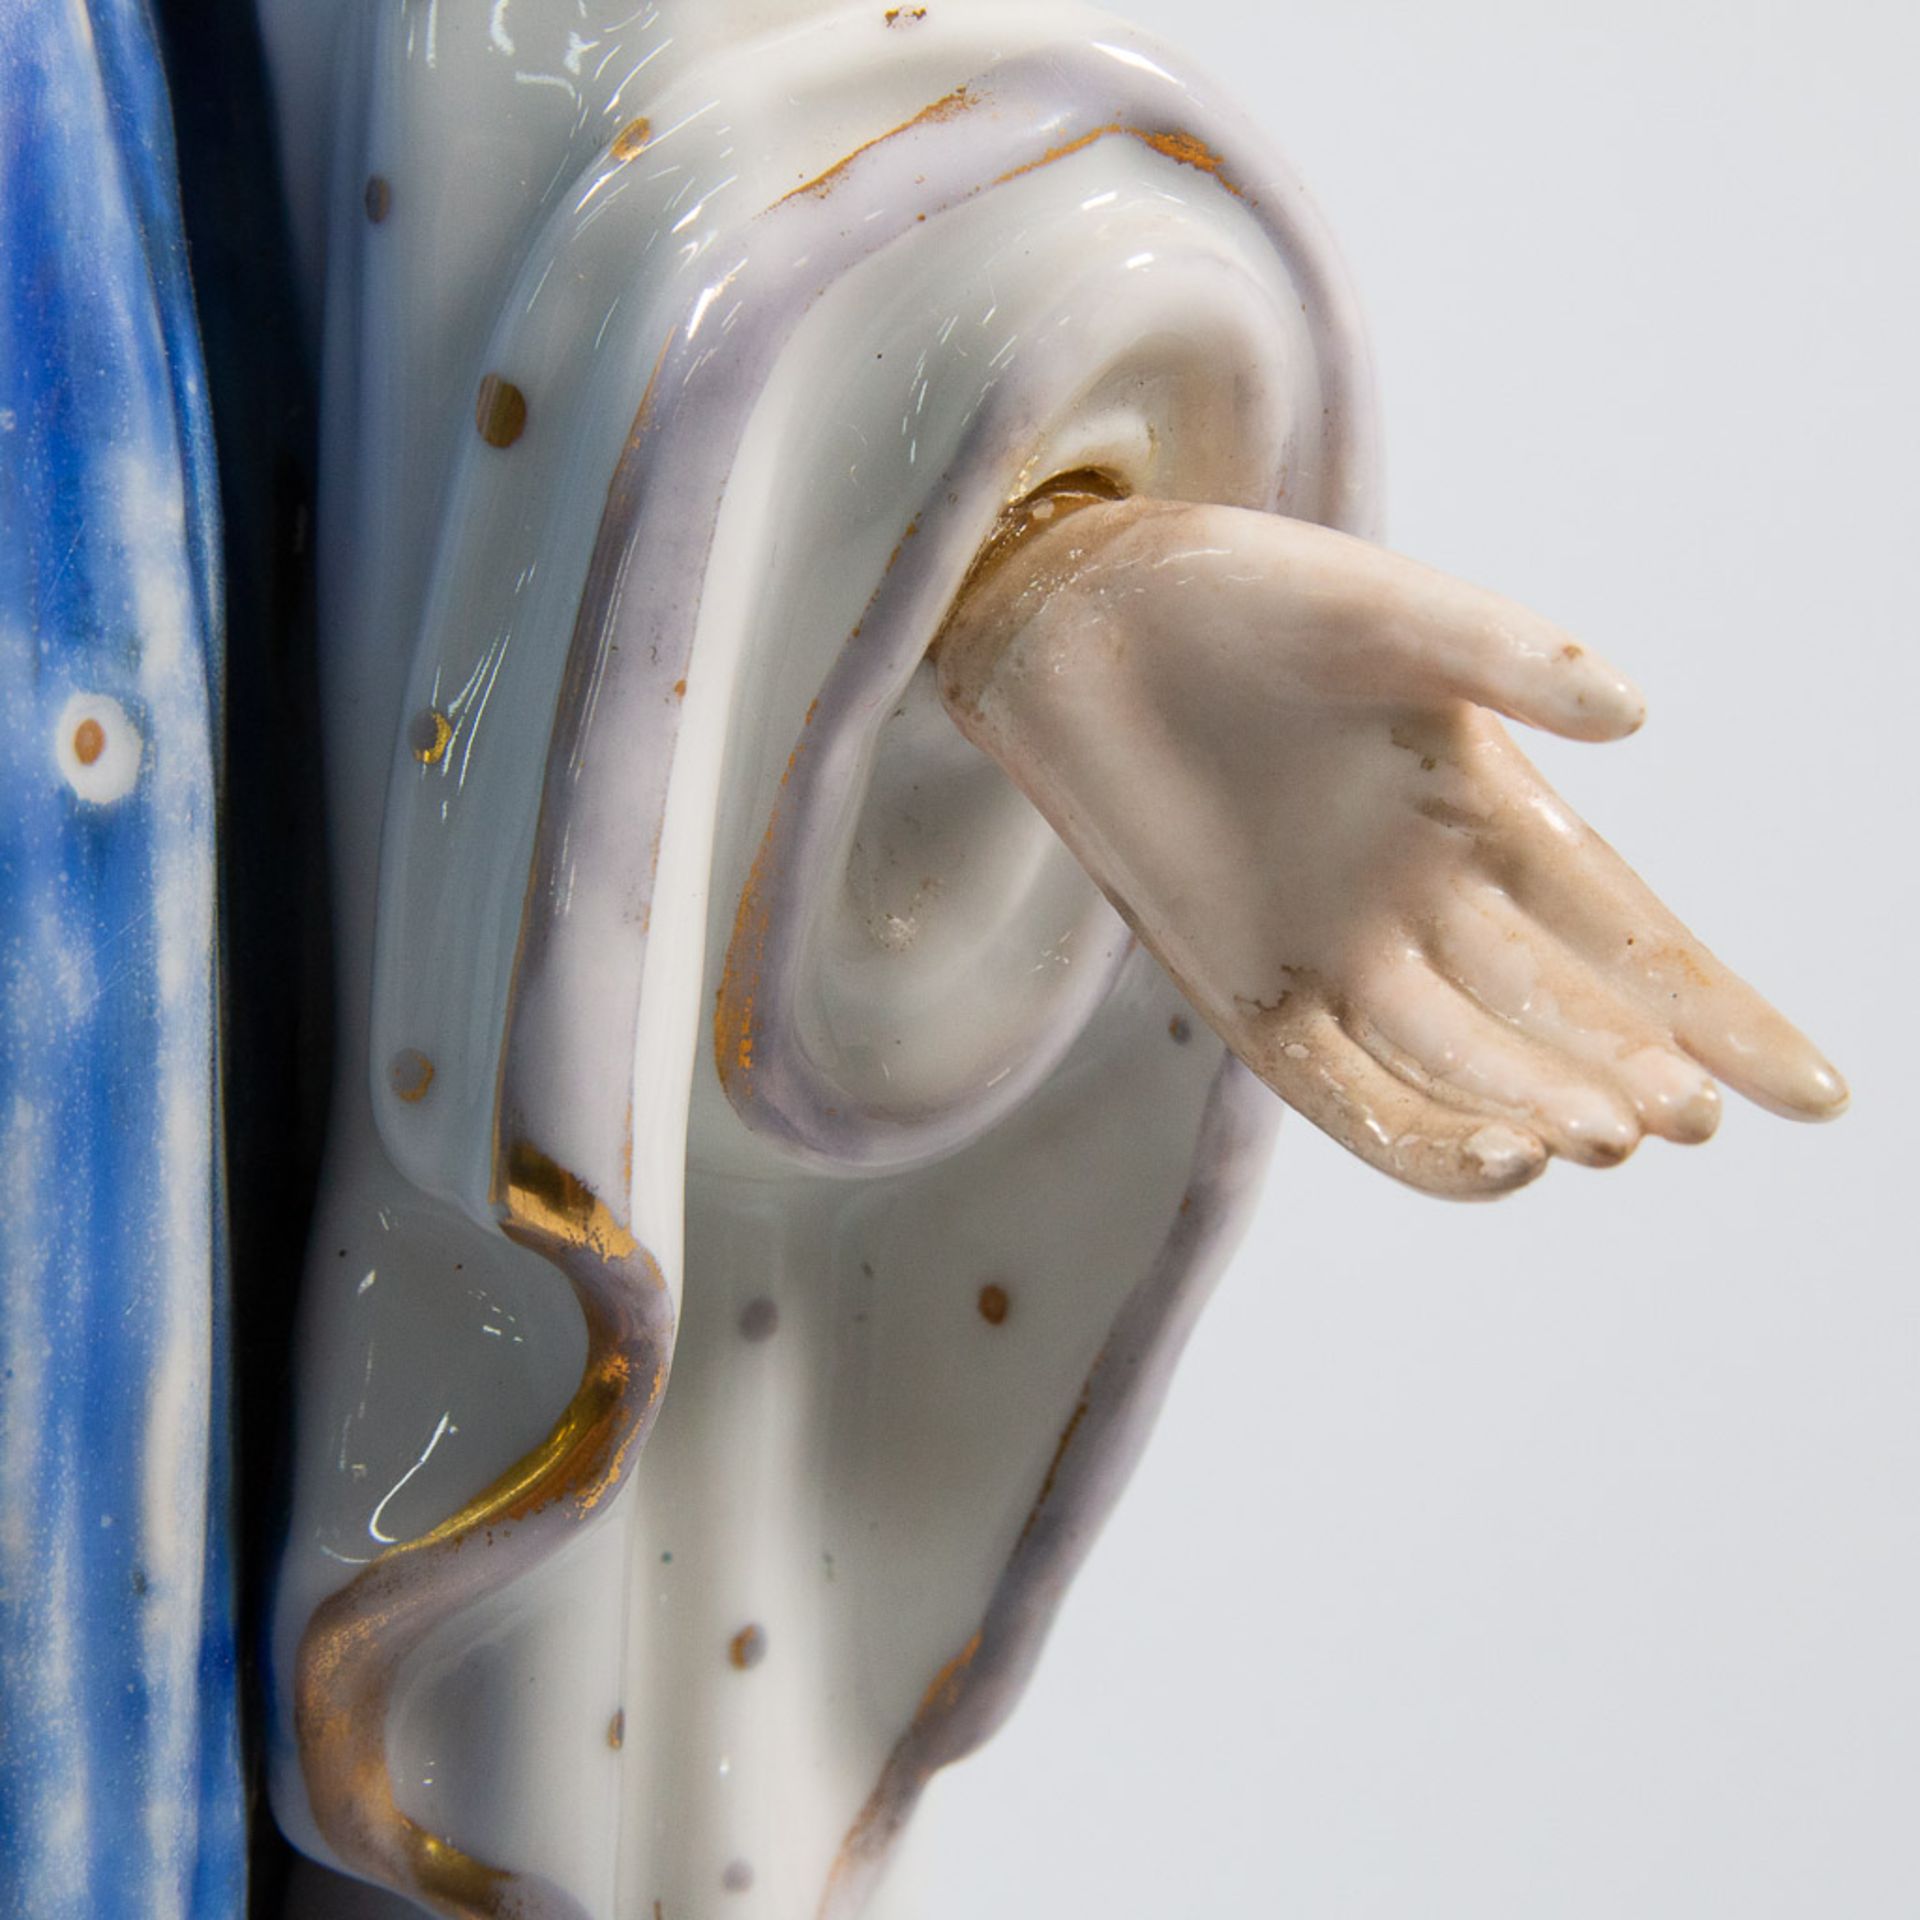 Madonna made of porcelain, 19th century - Image 12 of 18